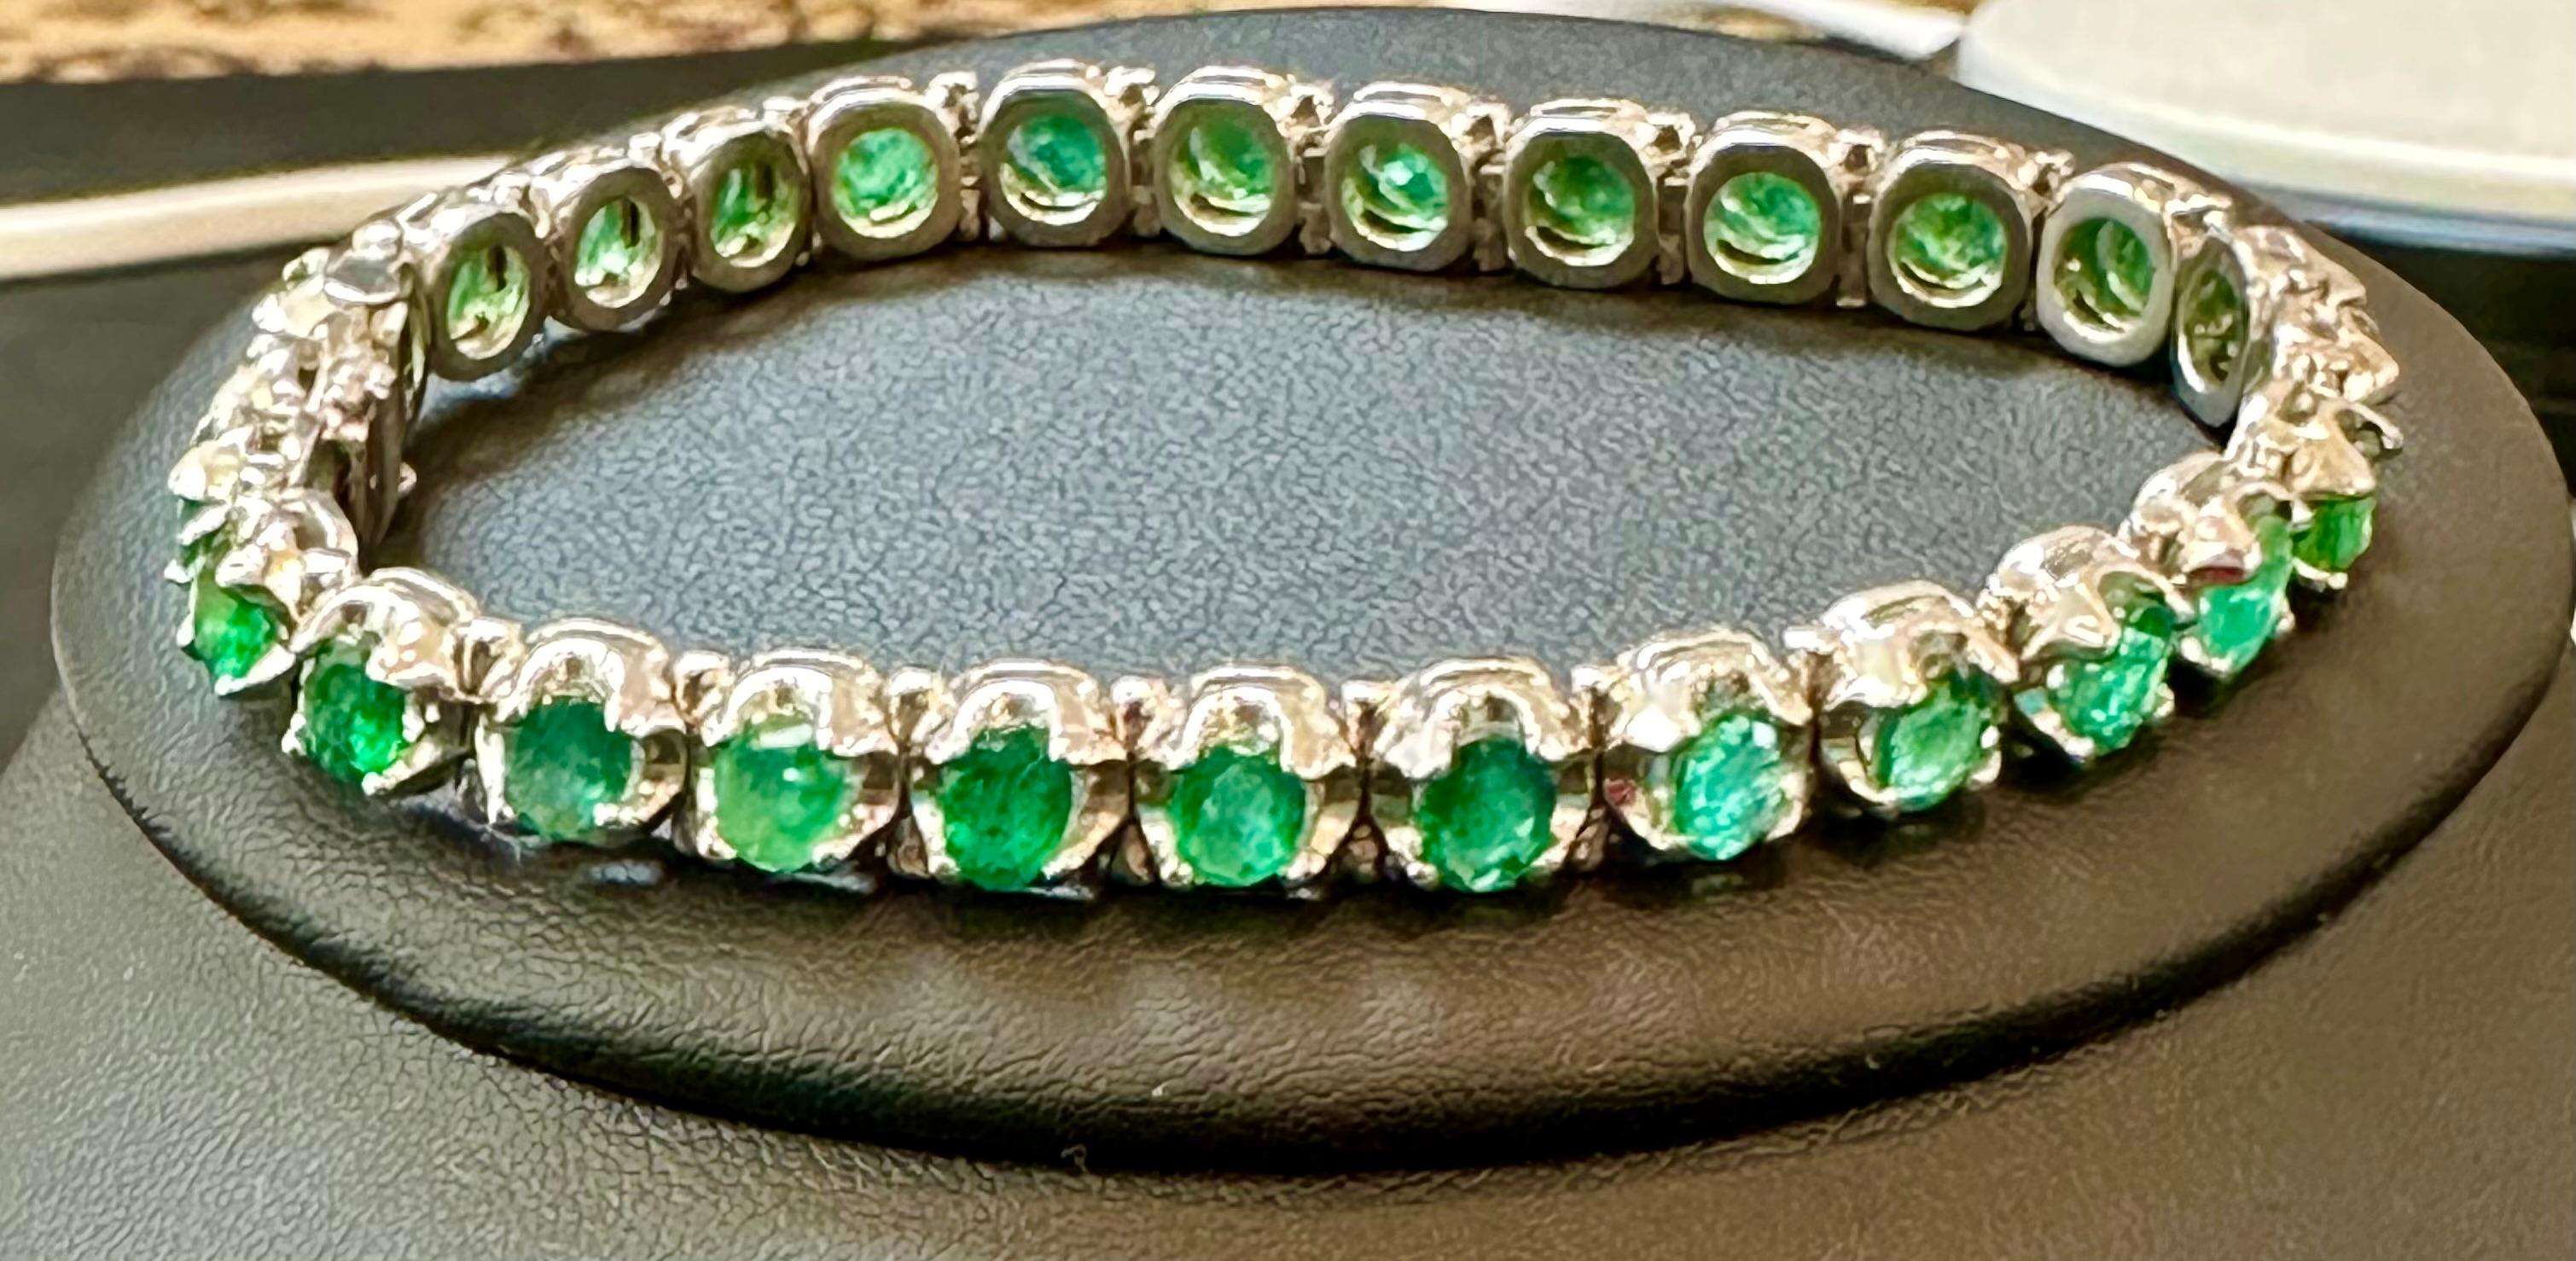  10 Ct Natural Oval Brazilian Emerald  Tennis Bracelet in Platinum , 7.5 Inches For Sale 4